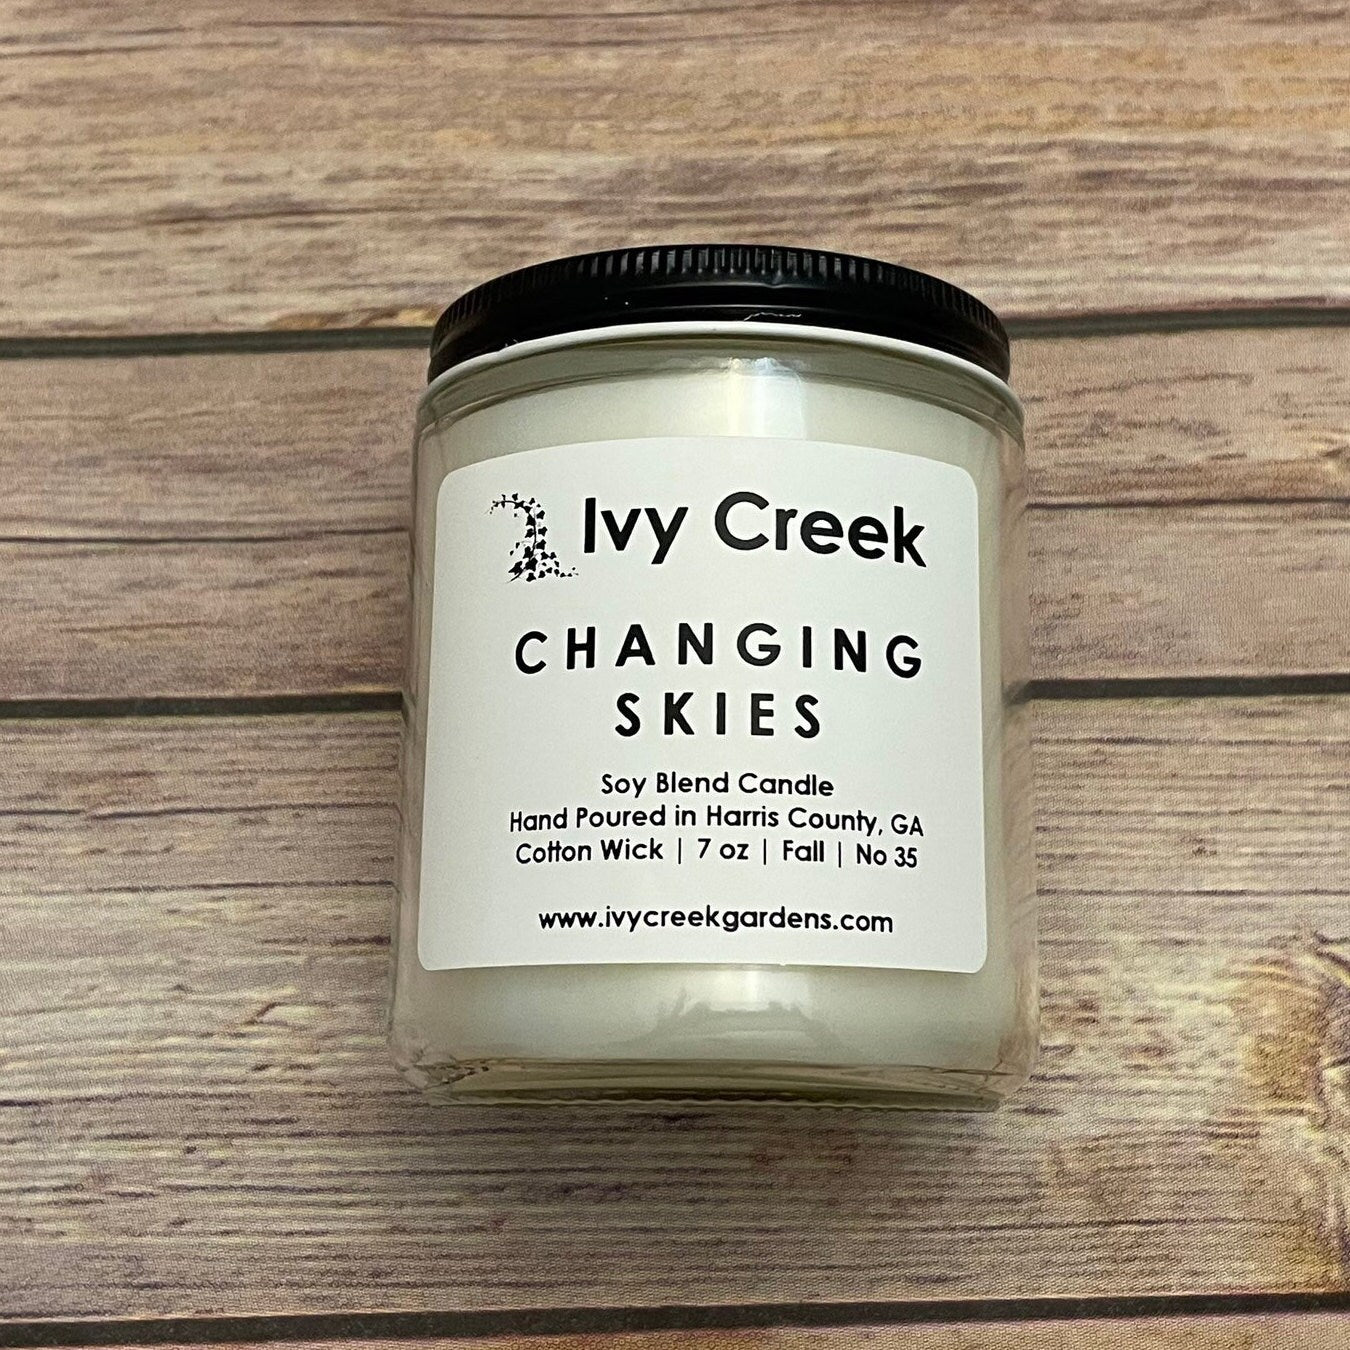 Ivy Creek Changing Skies 7 oz Soy Blend Candle | Hand Poured | Cotton Wick | Small Batch | Clean Burning | Container Candle